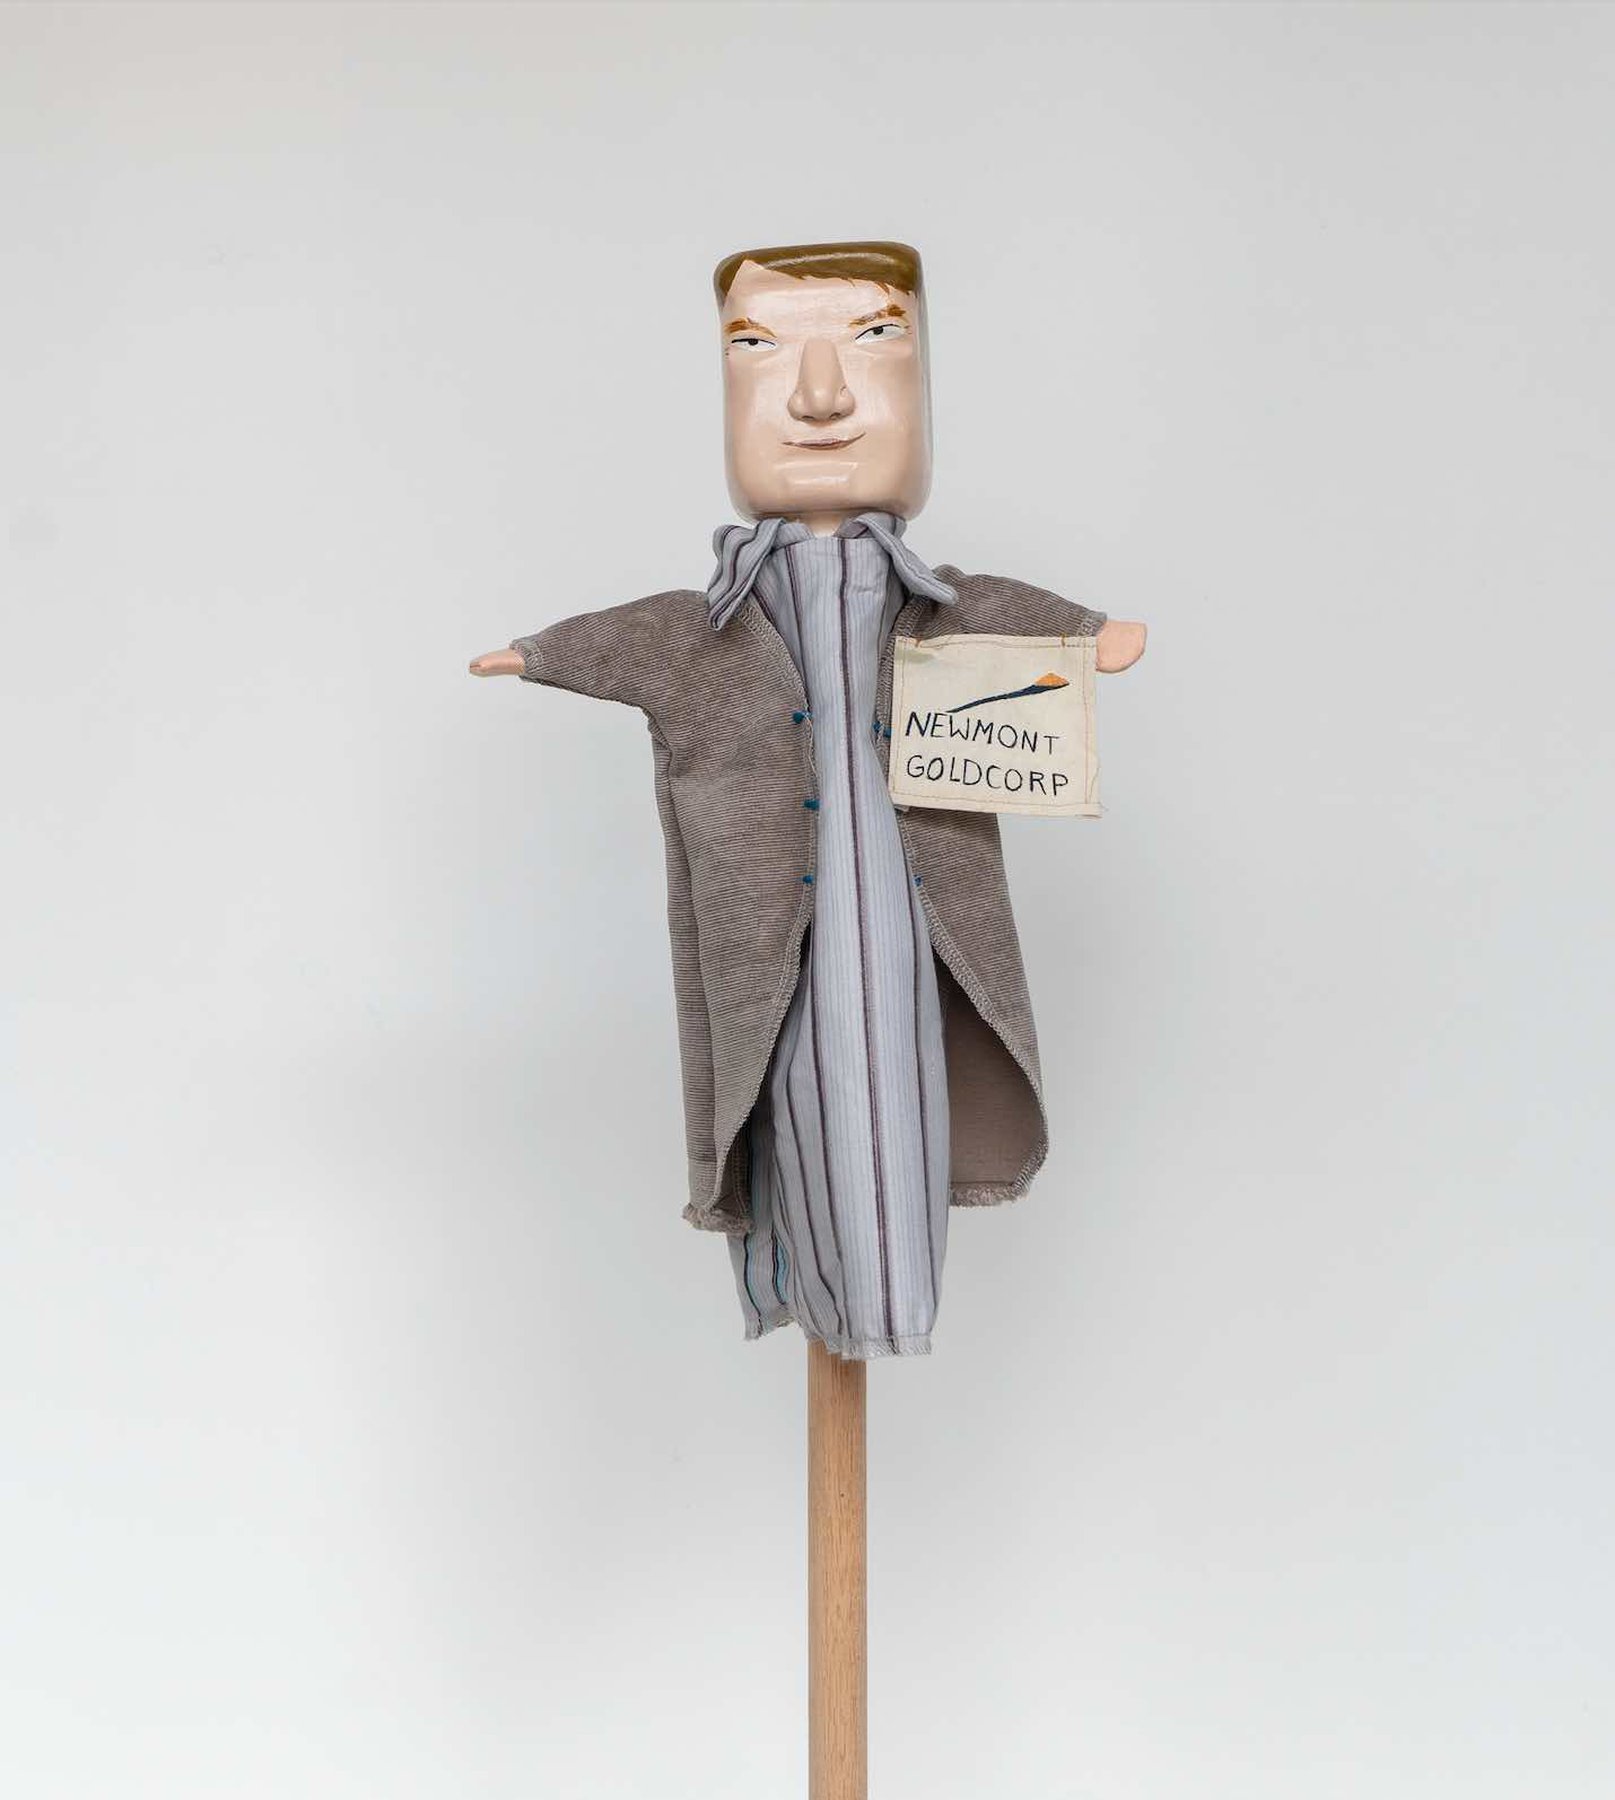 Daniela Ortiz, The Brightness of Greedy Europe, 2022, wood hand-carved, sewn, knitted and embroidered costumes (25 cm) puppet - Tomas Palmer